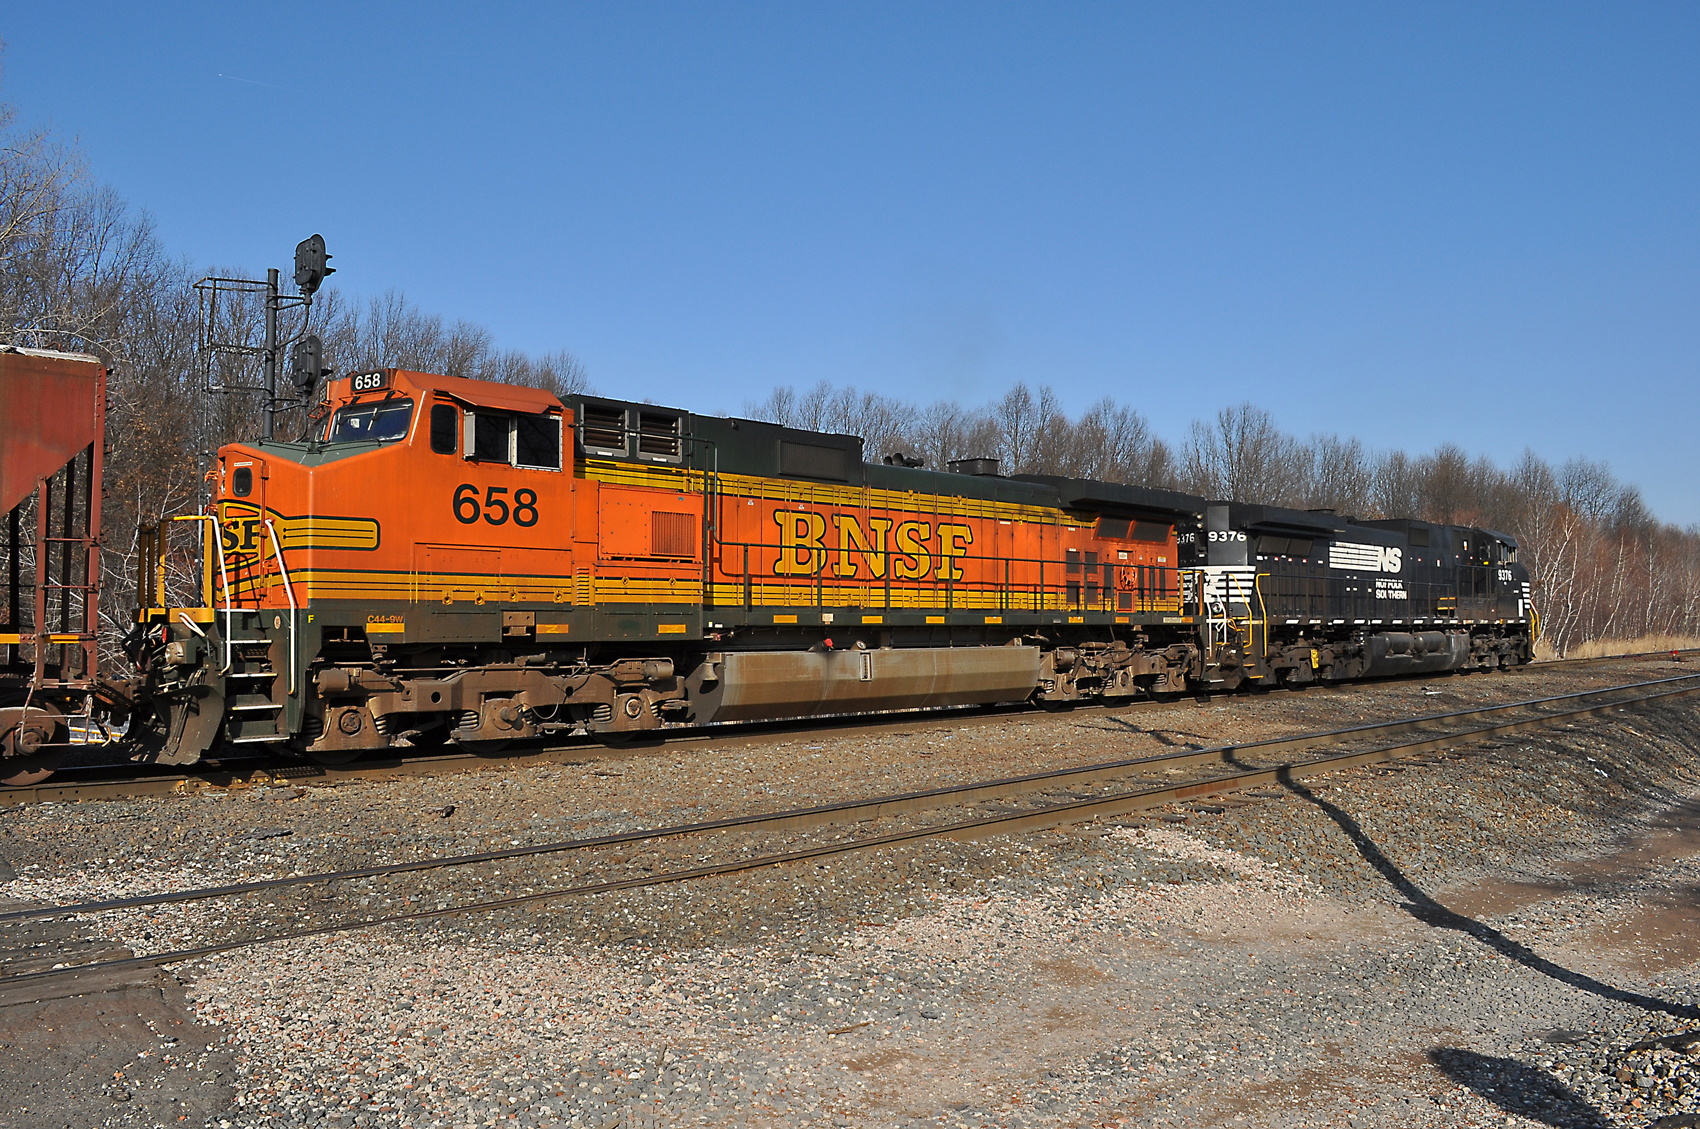 Norfolk Southern ethanol train 68Q enters the ‘Chemical Coast Line 